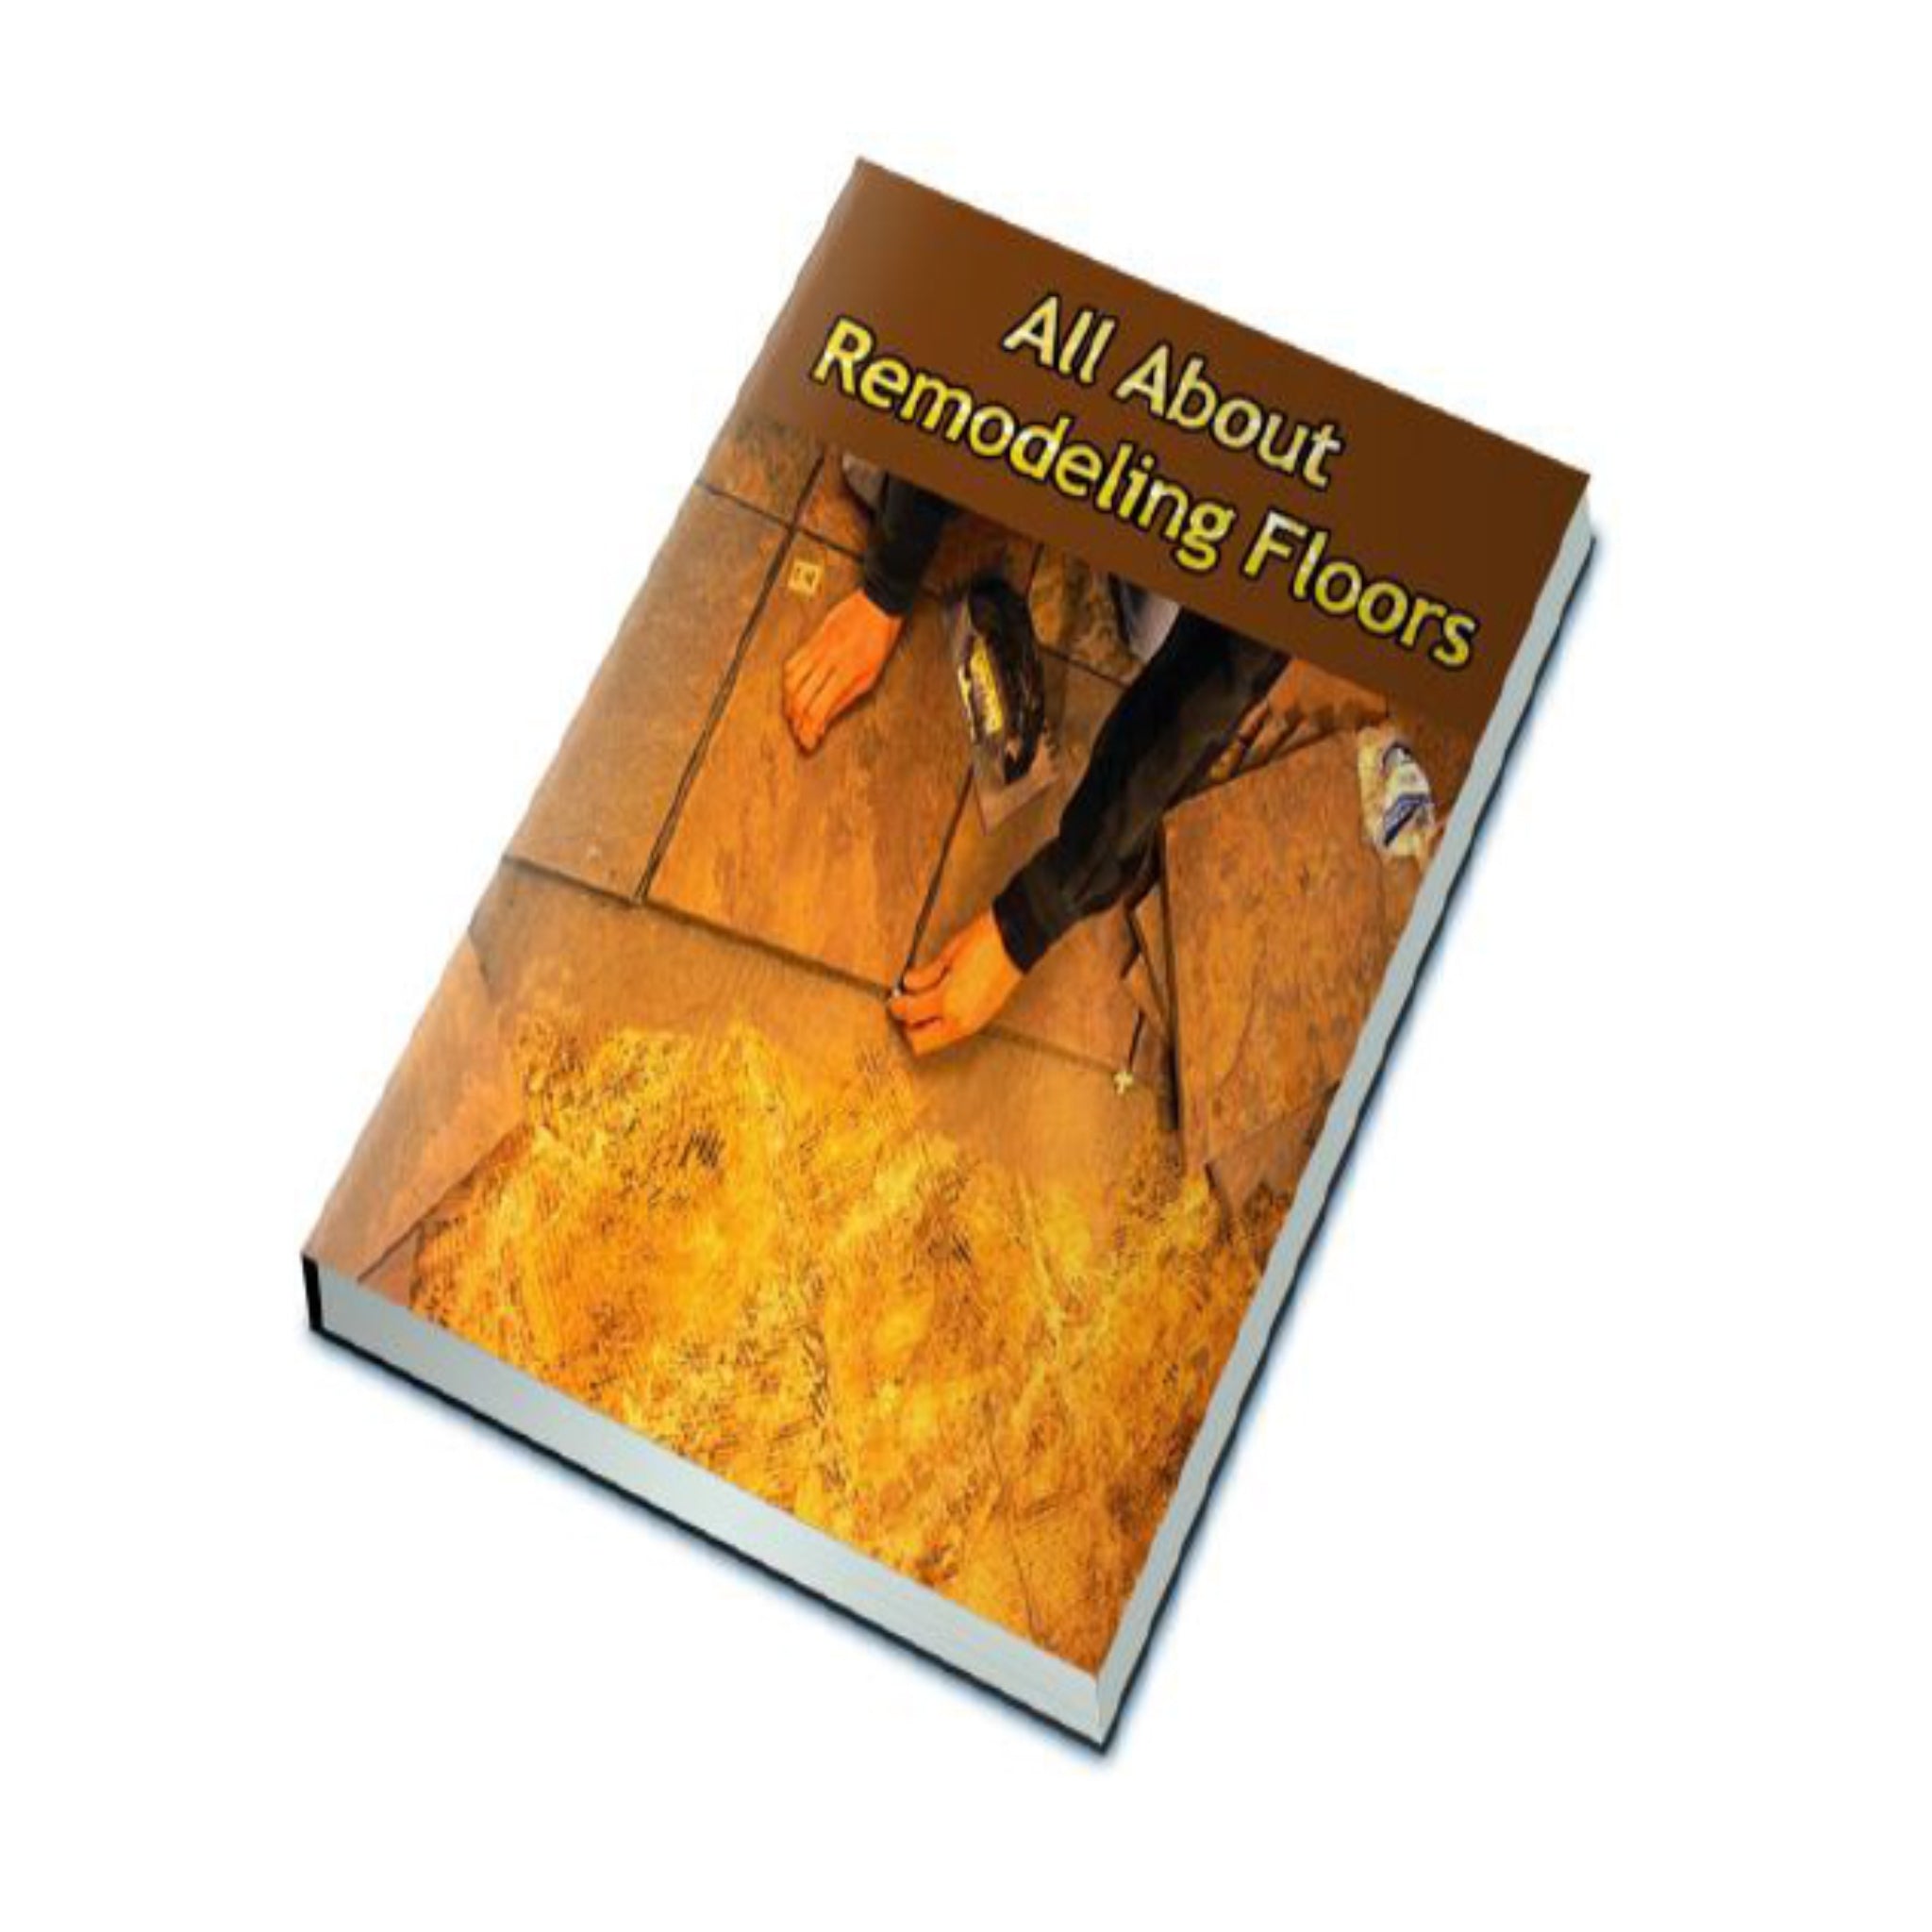 All About Remodeling Floors Ebook